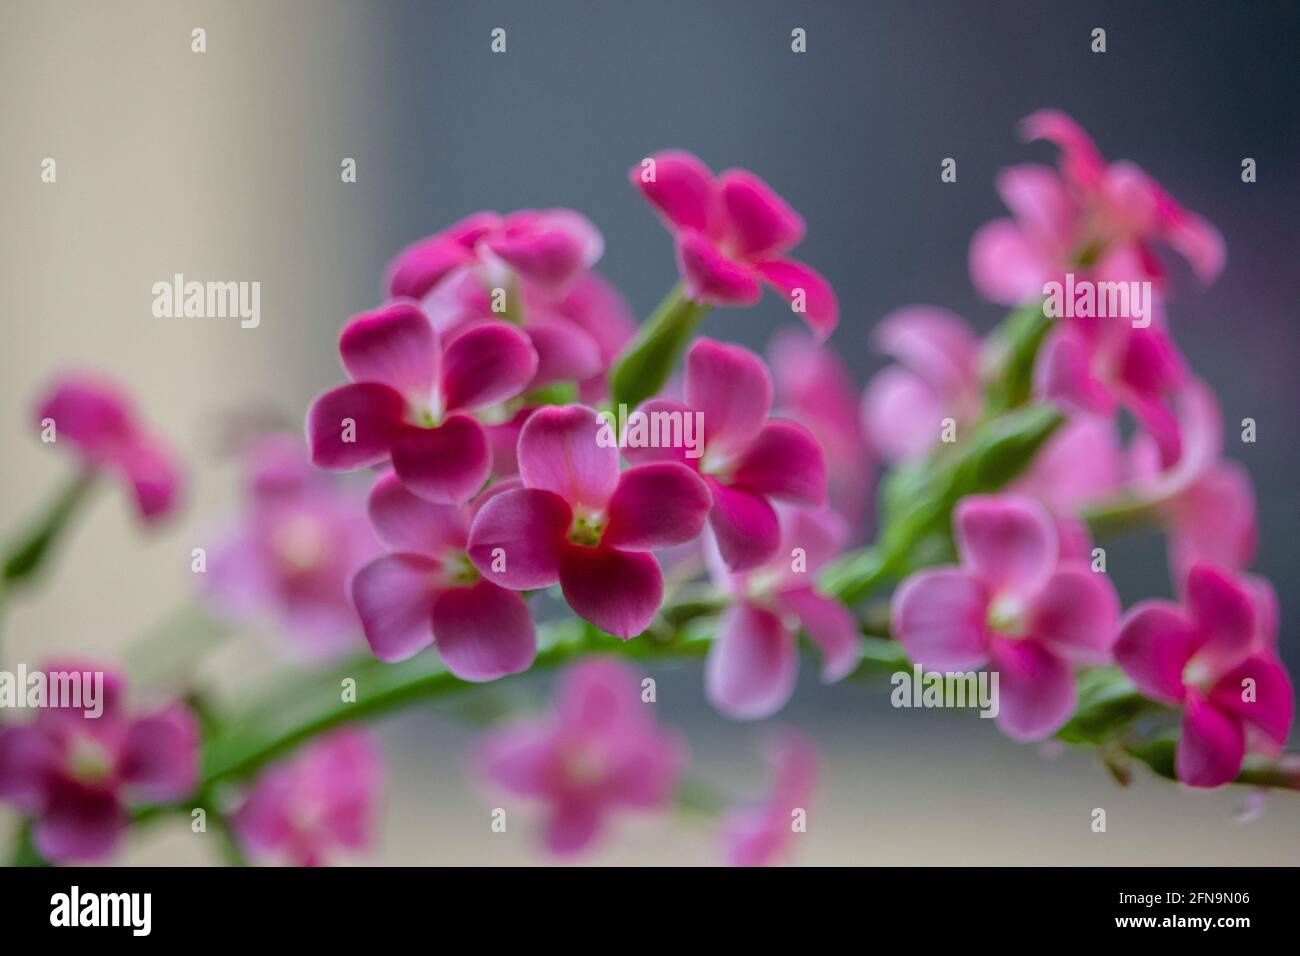 A pink house plant Kalanchoe. Stock Photo